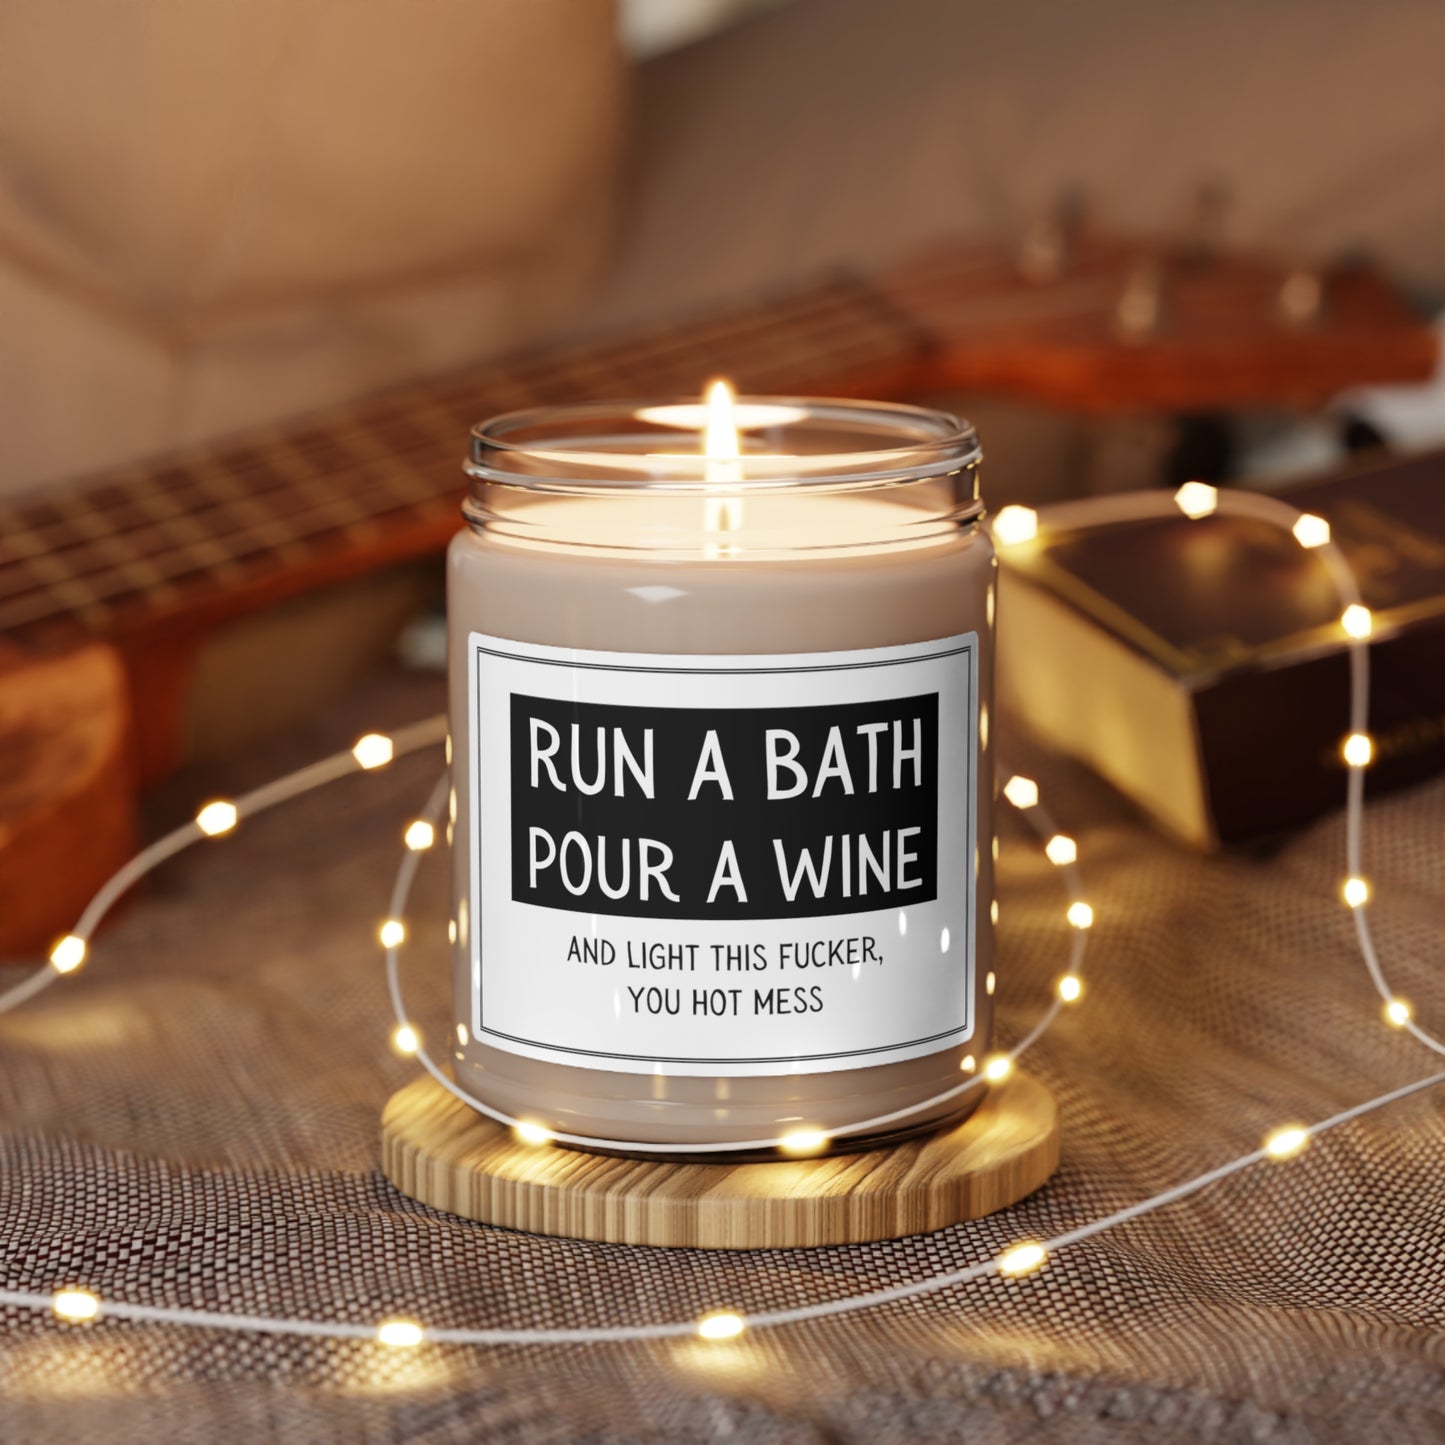 "Run a Bath, Pour a Wine" Scented Soy Candle, 9oz